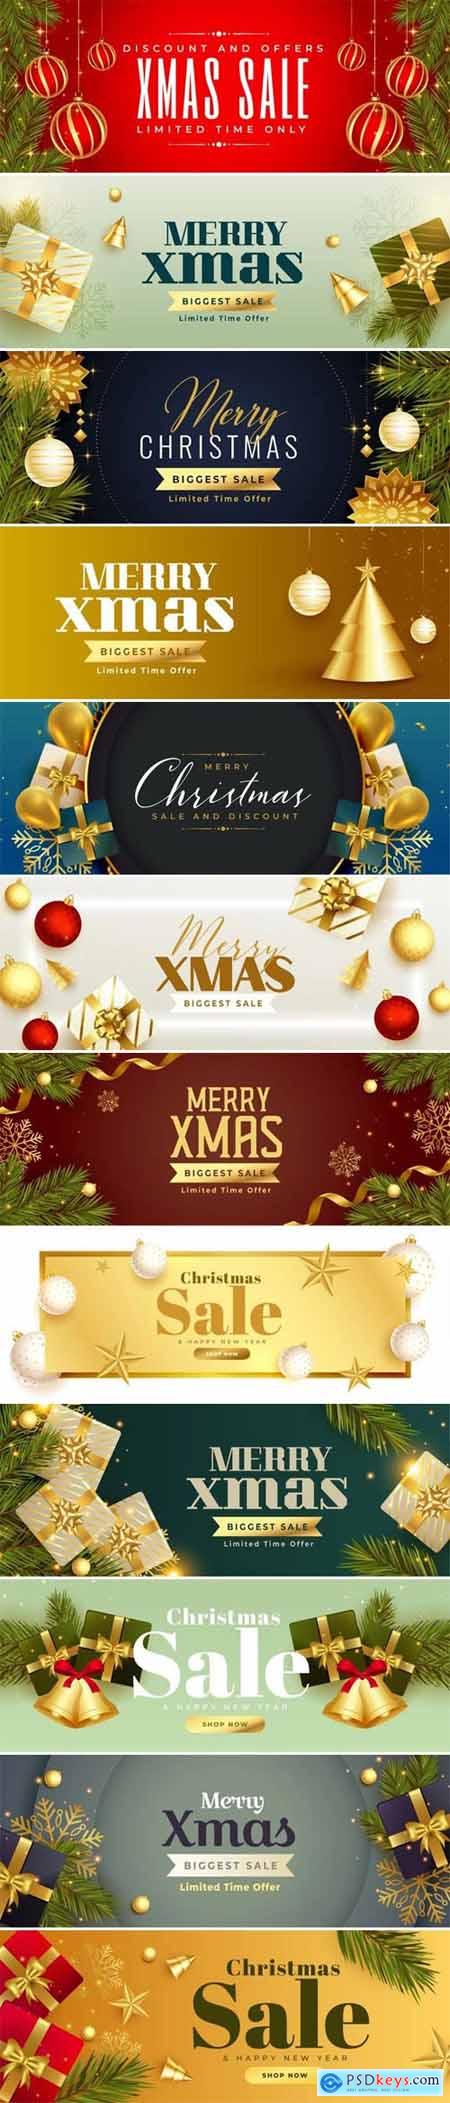 10+ Holiday Sale Web Banners Vector Templates